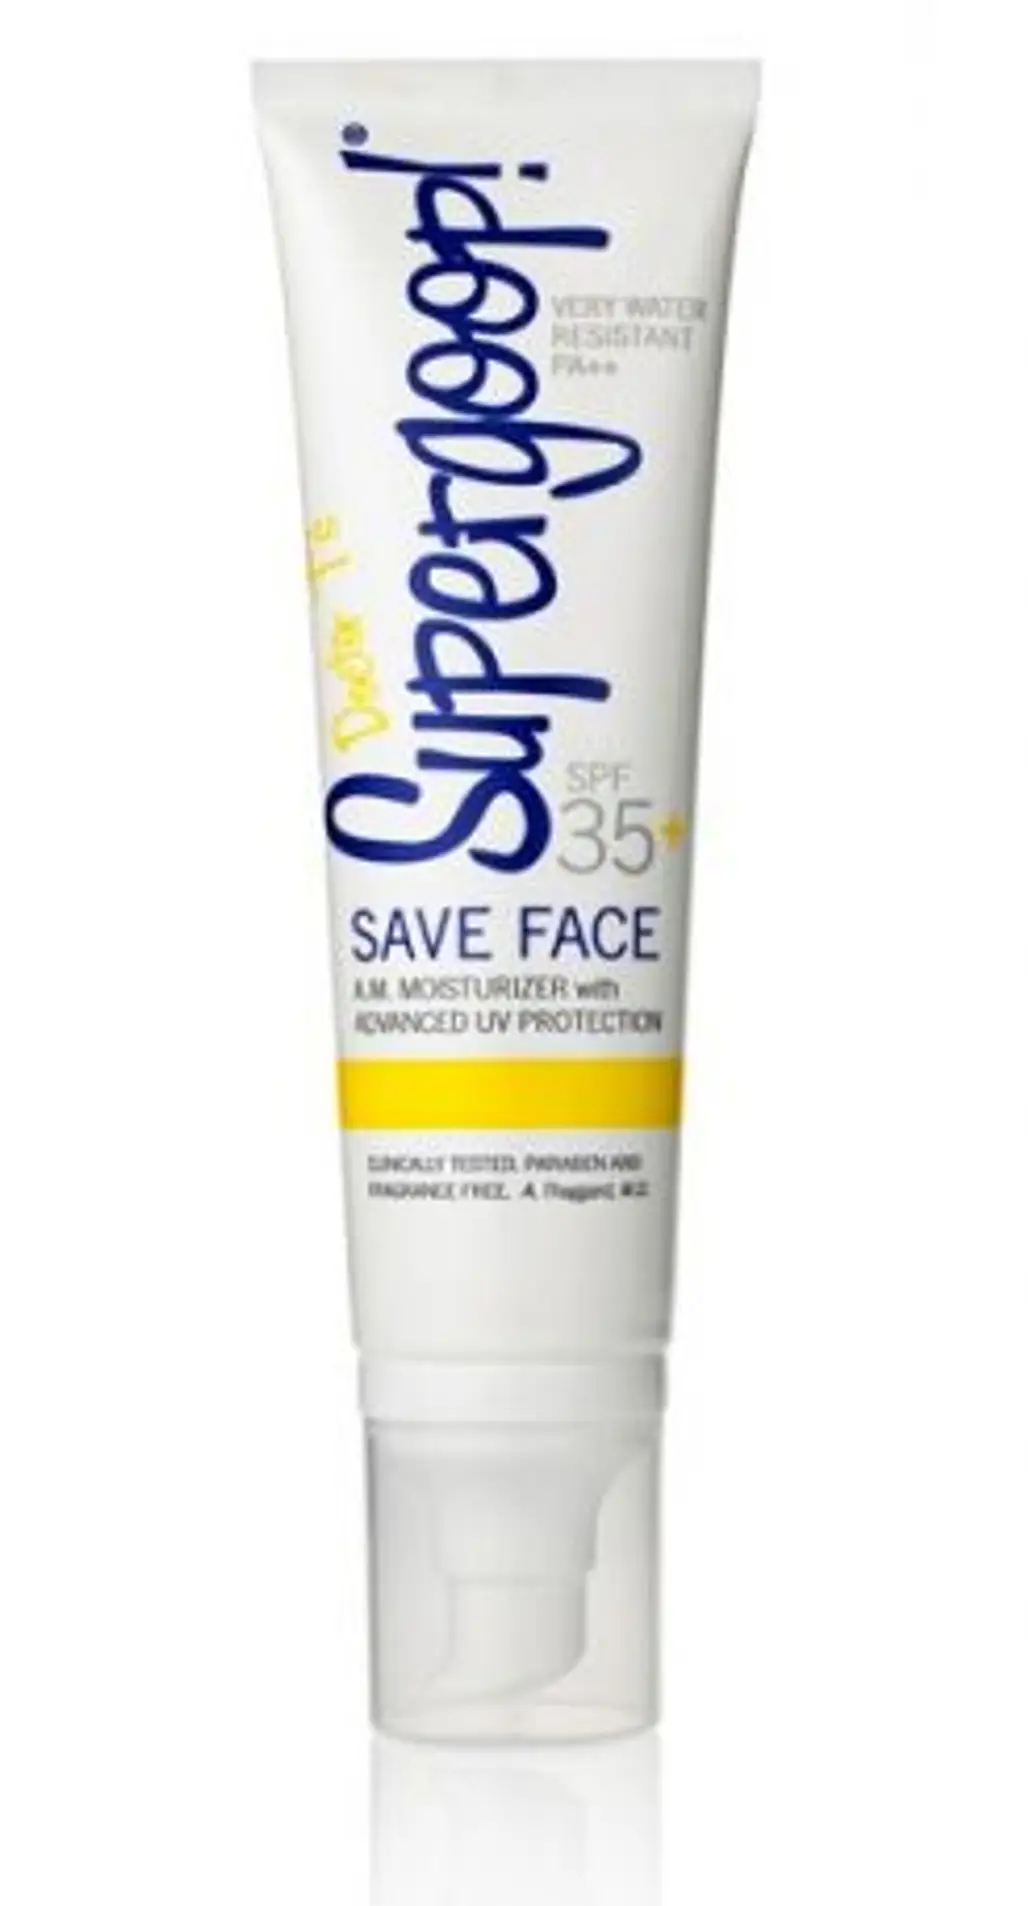 Supergoop! save Face a.M. Moisturizer SPF 35+with Advanced UV Protection